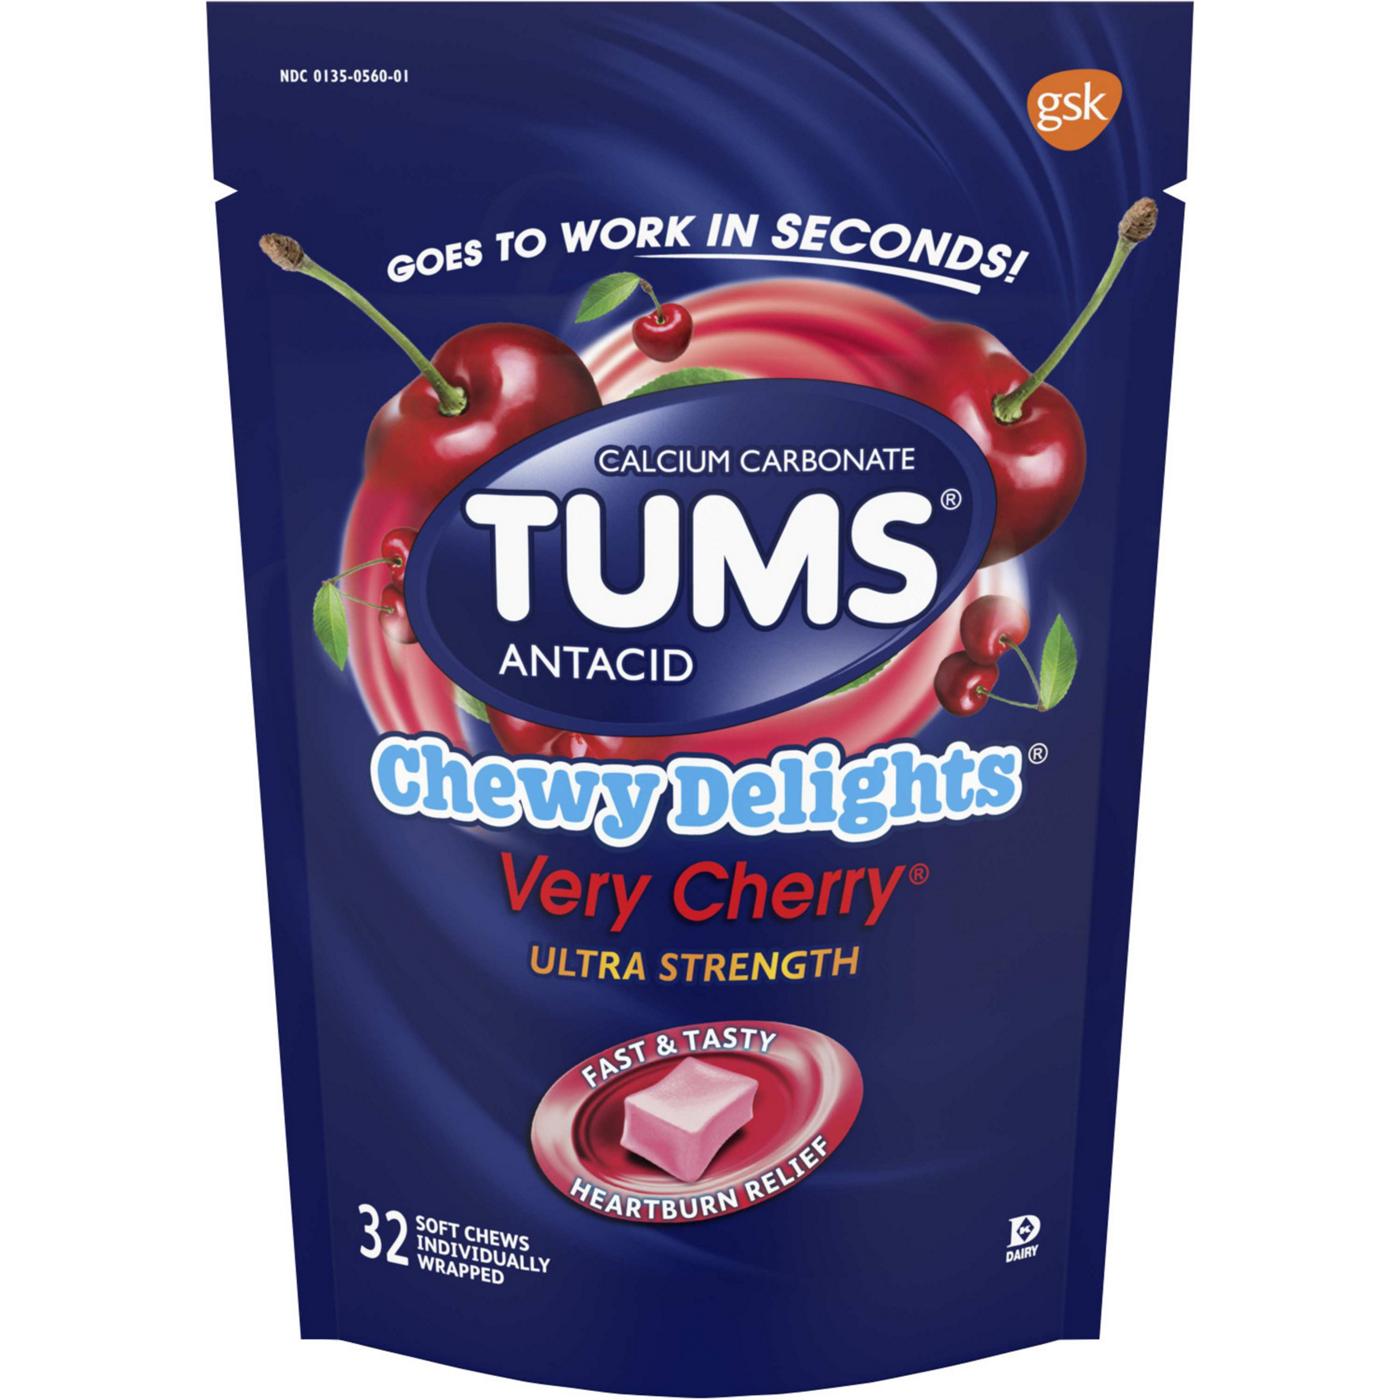 Tums Chewy Delights Ultra Strength Very Cherry Antacid Soft Chew; image 1 of 7